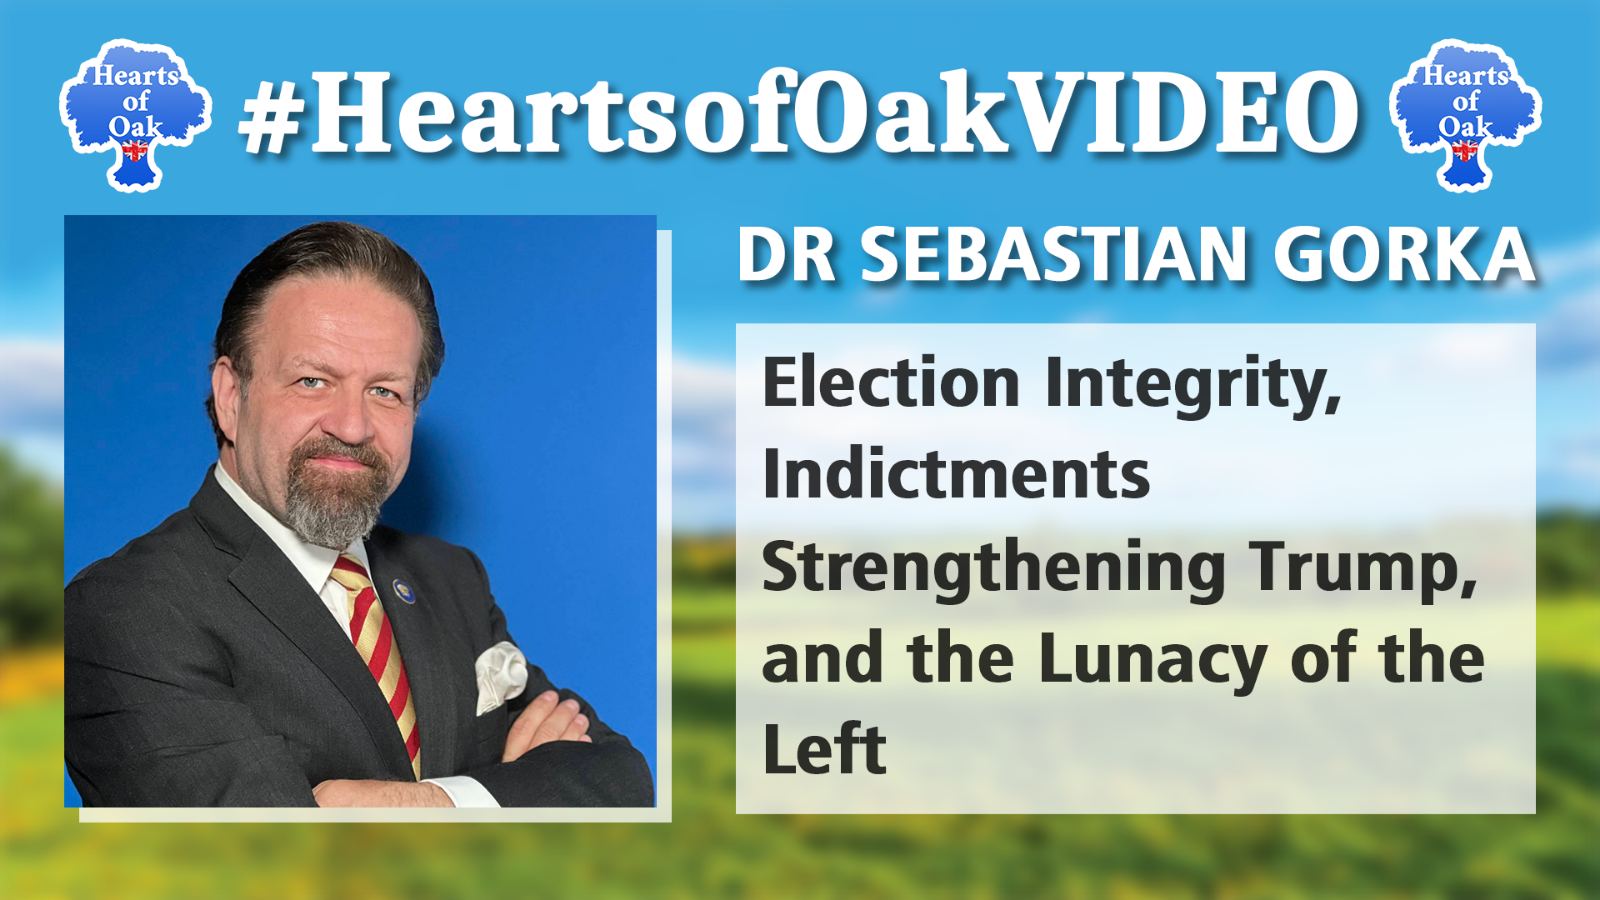 Dr Sebastian Gorka - Election Integrity, Indictments Strengthening Trump and the Lunacy of the Left